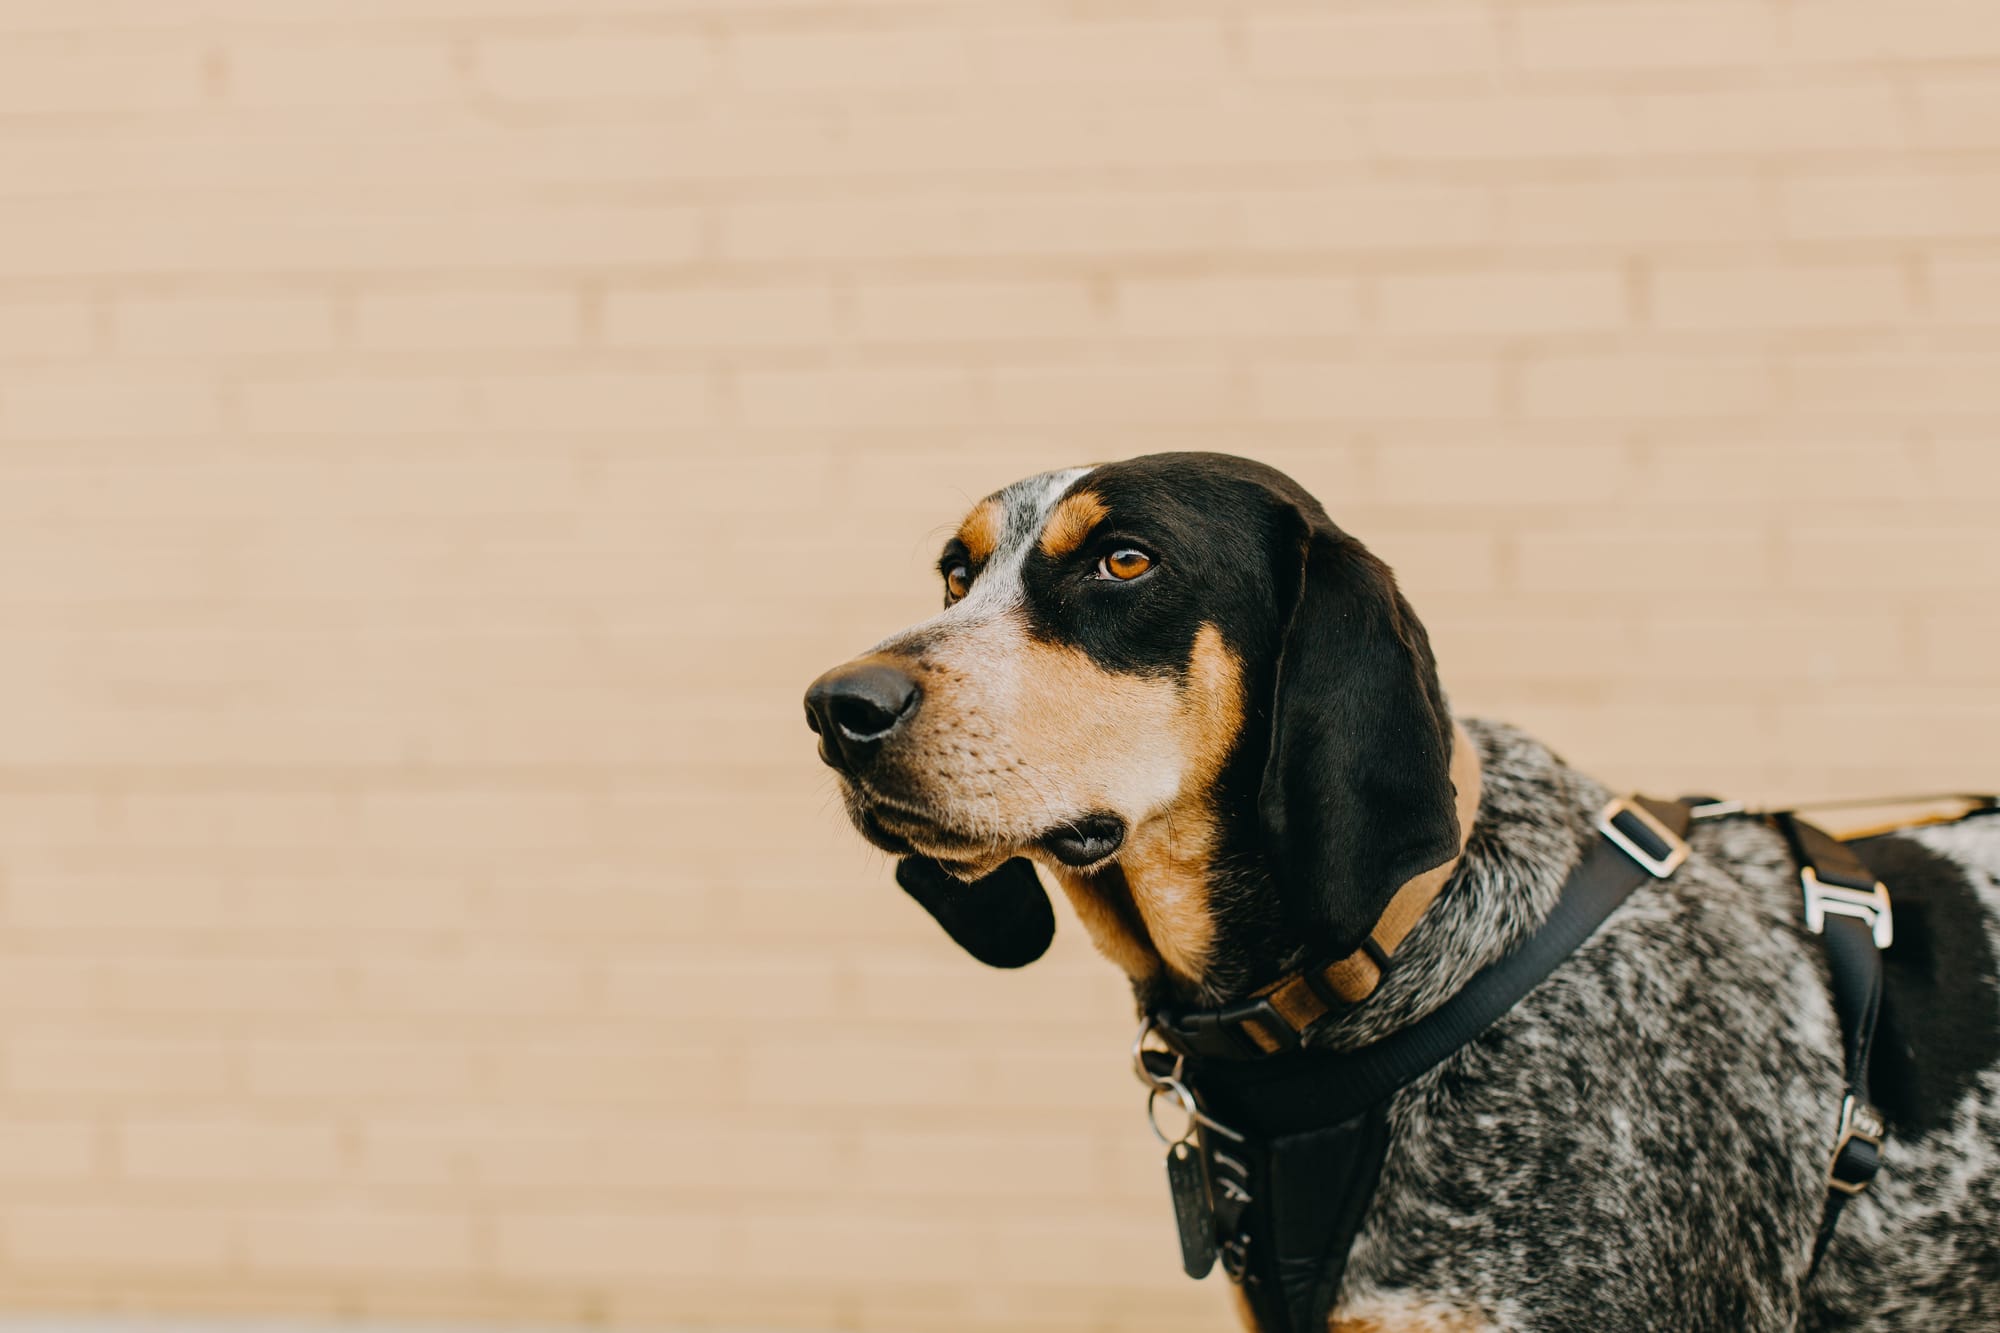 Vocal World of Bluetick Coonhounds